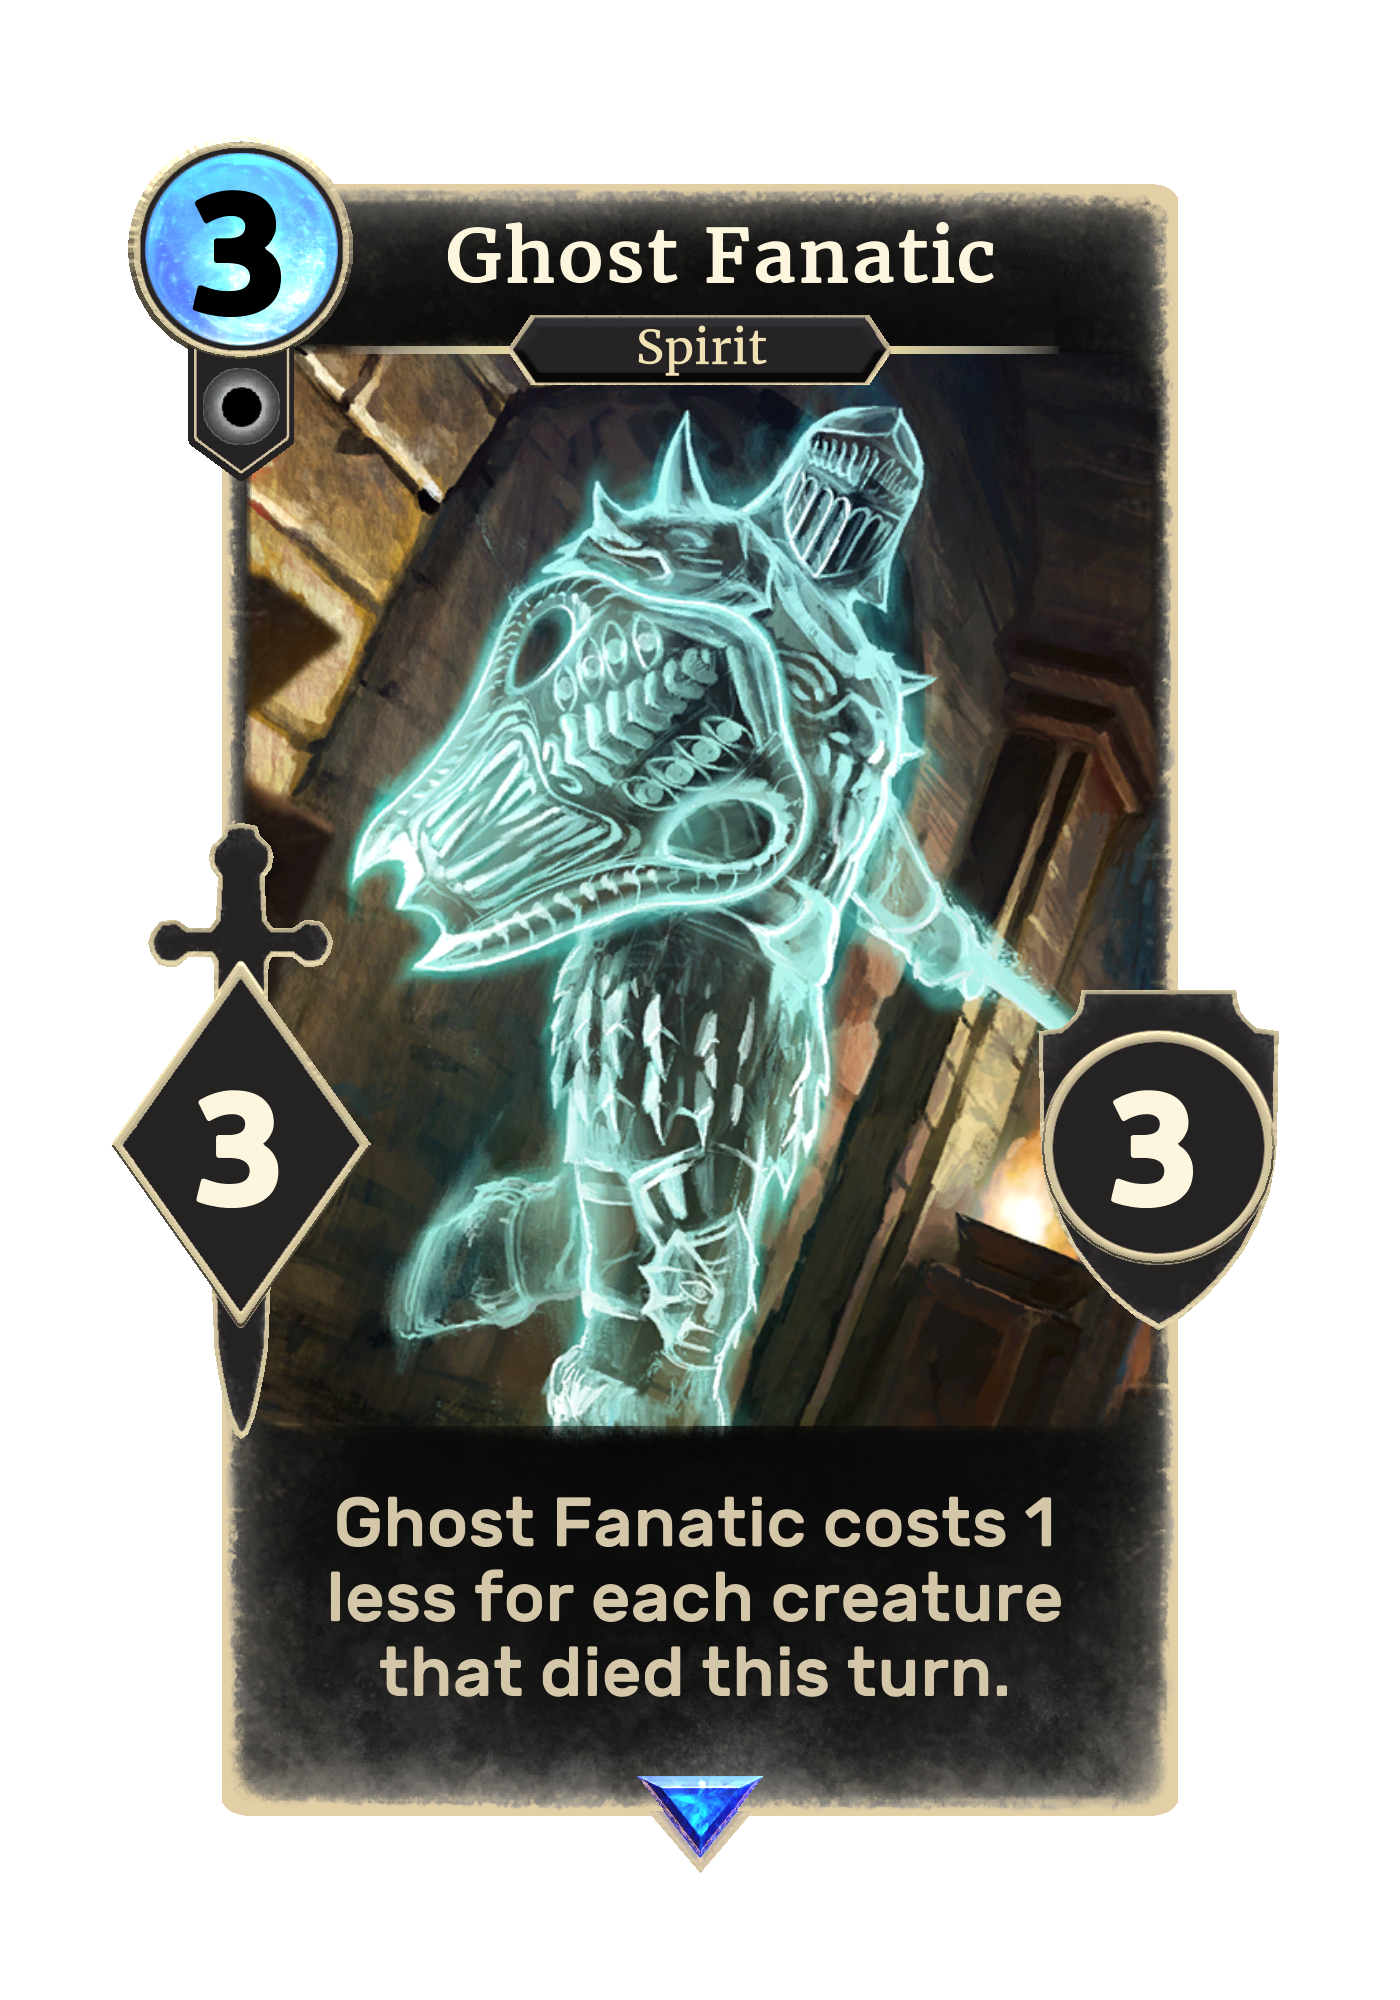 ‘The Elder Scrolls: Legends’: We Scare Up an Exclusive Card Reveal From Isle of Madness